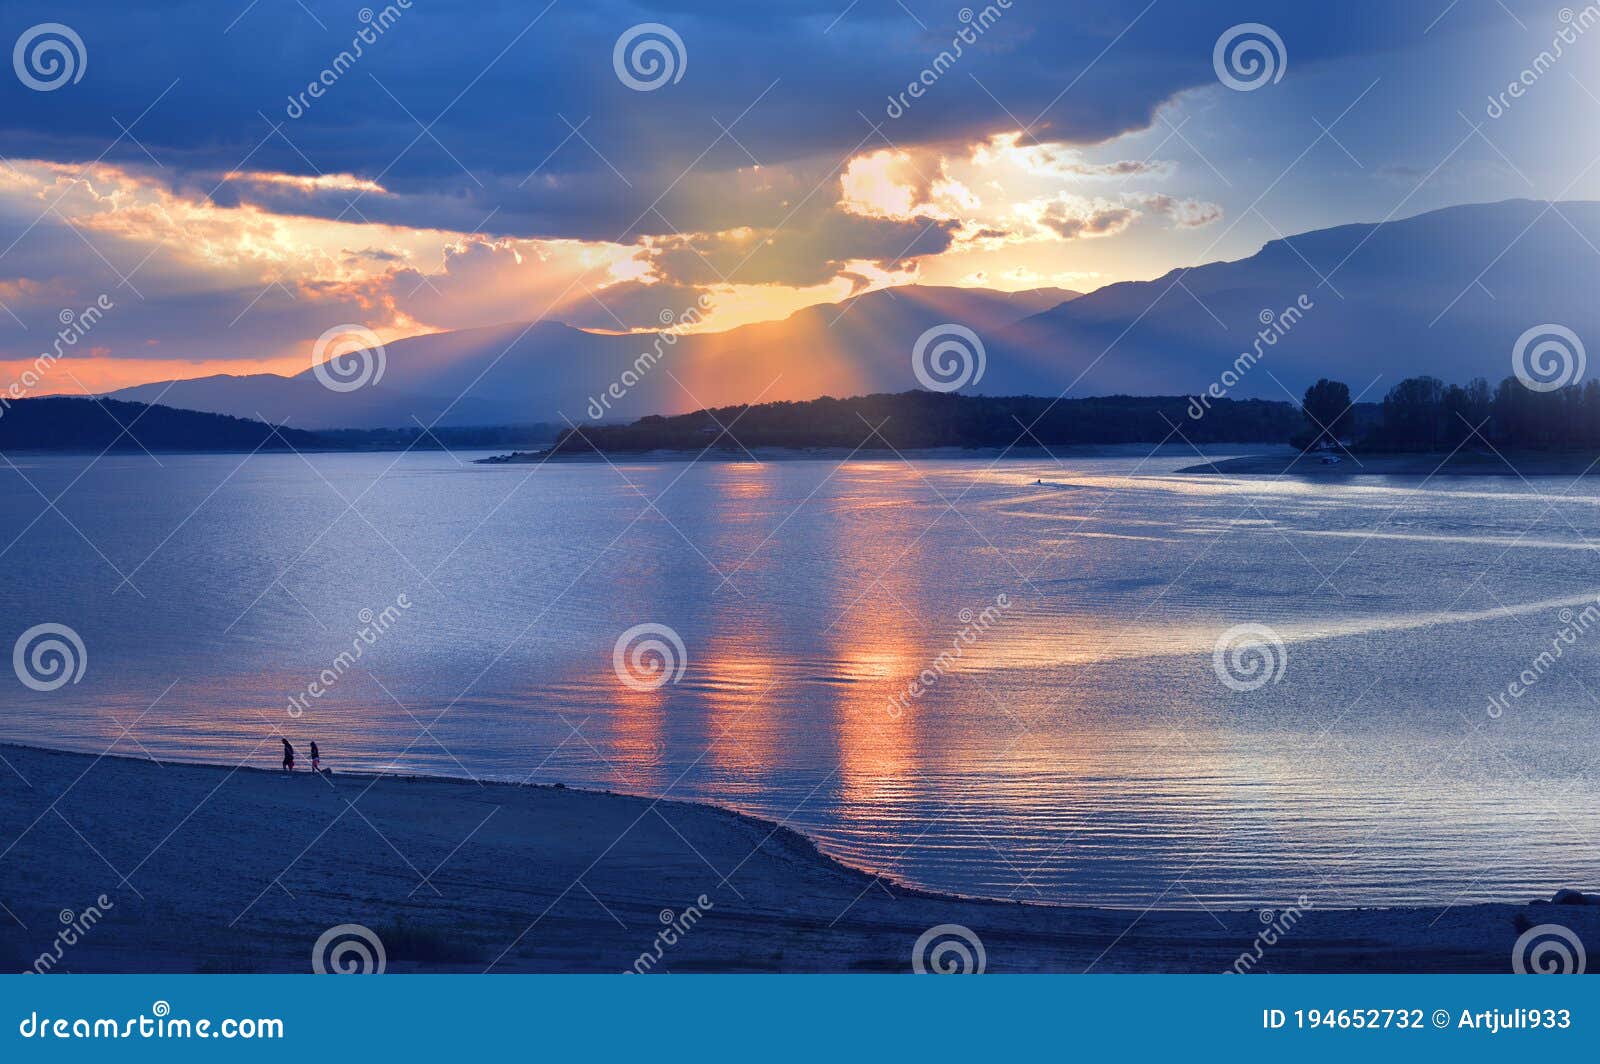 beautiful nature background.summer sunset landscape.artistic wallpaper.relaxation,water,sky.creative photography.travel,sun.love.